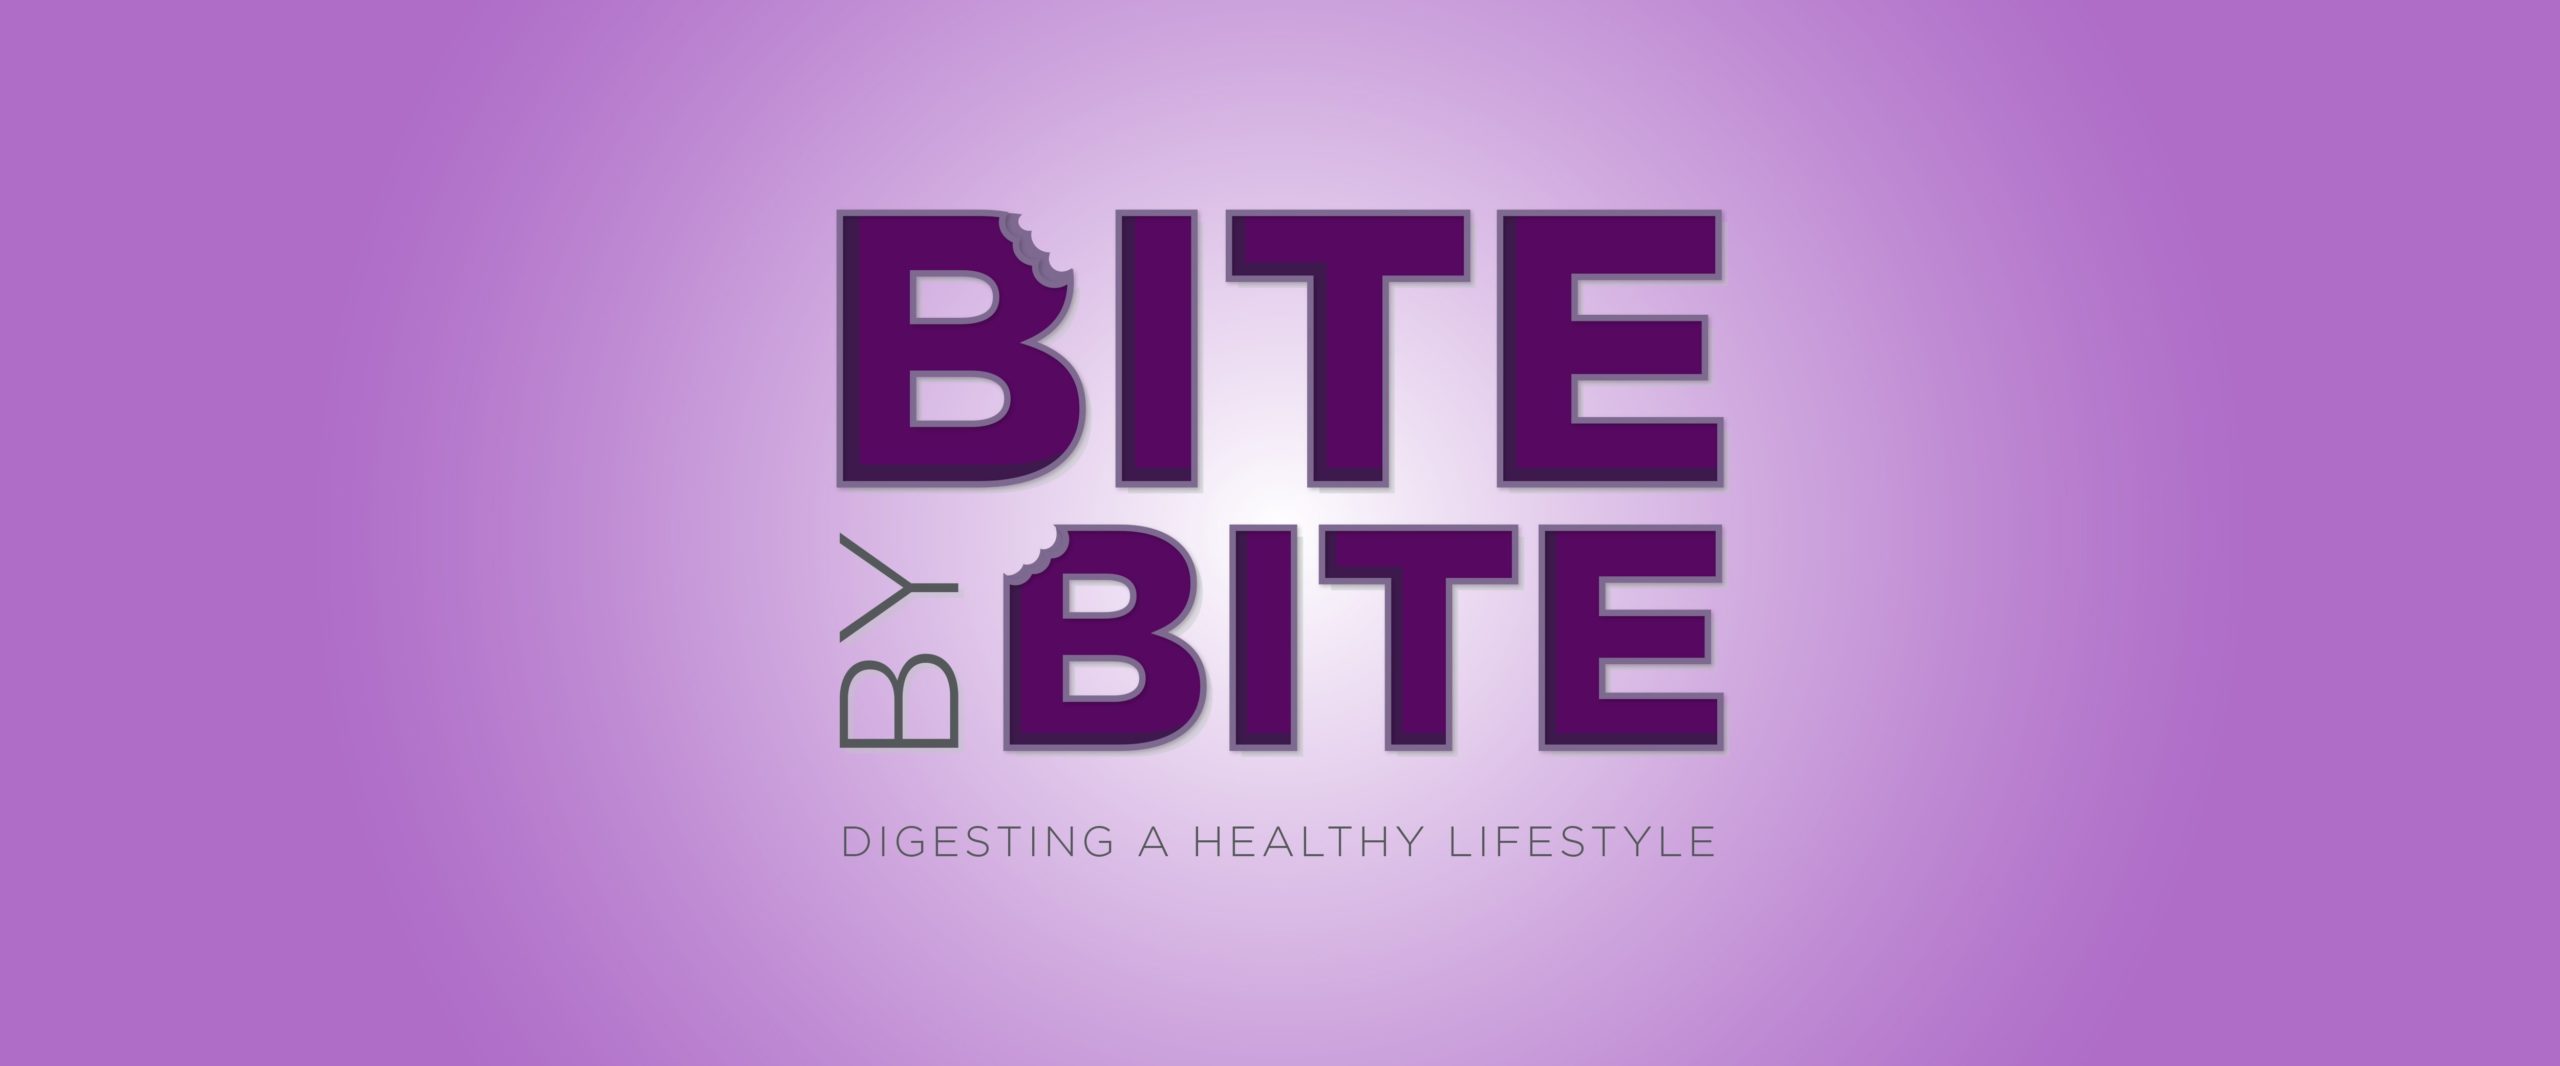 Bite by Bite: Digesting a Healthy Lifestyle